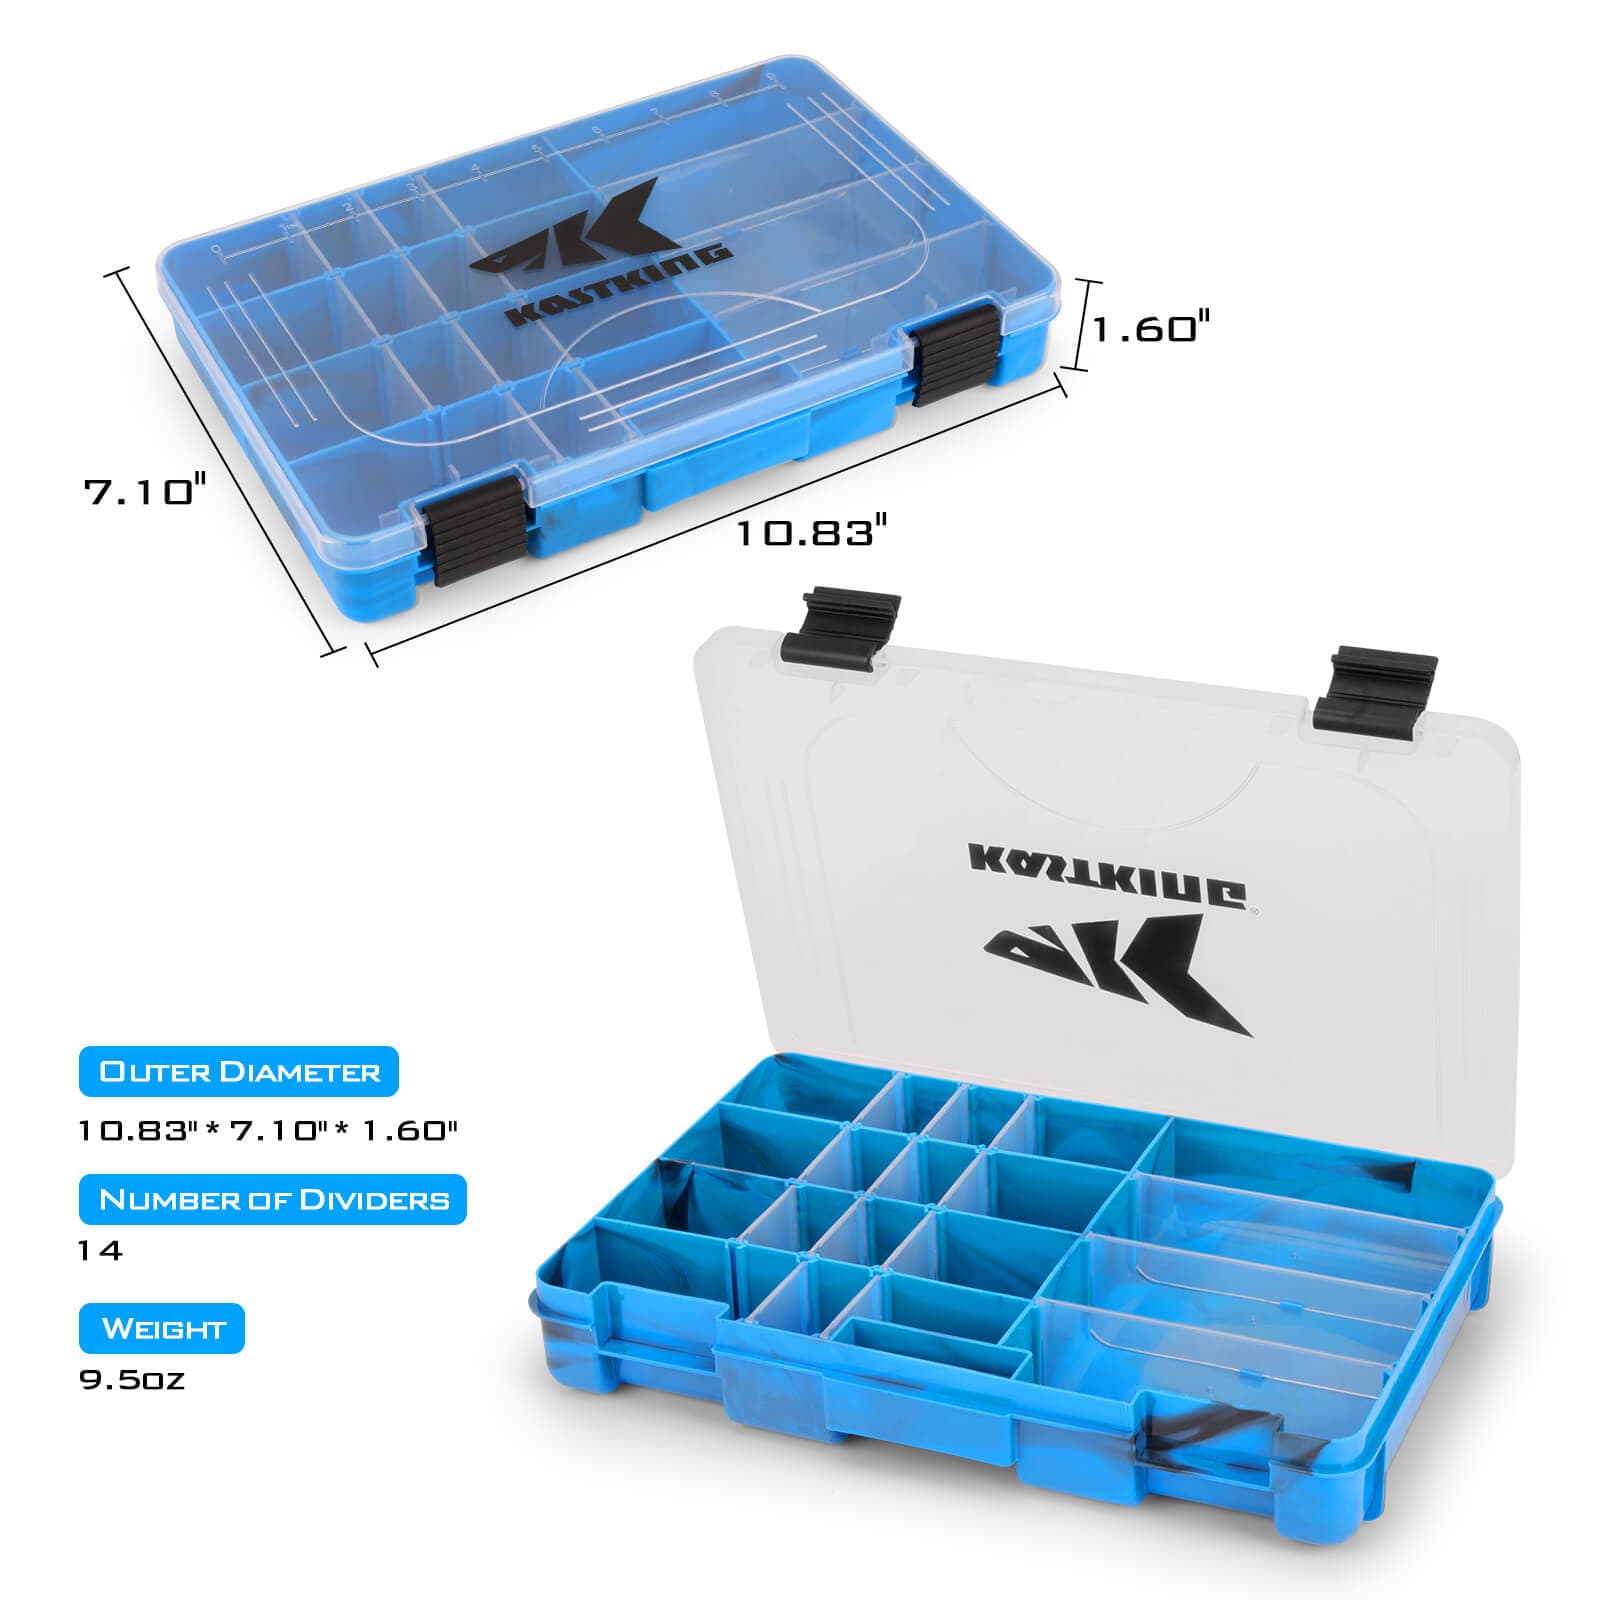  KastKing HyperSeal Waterproof Fishing Tackle Box, Waterproof  3600 and 3700 Tackle Trays, Organizer with Removable Dividers, Lure Box and Terminal  Tackle Storage : Sports & Outdoors